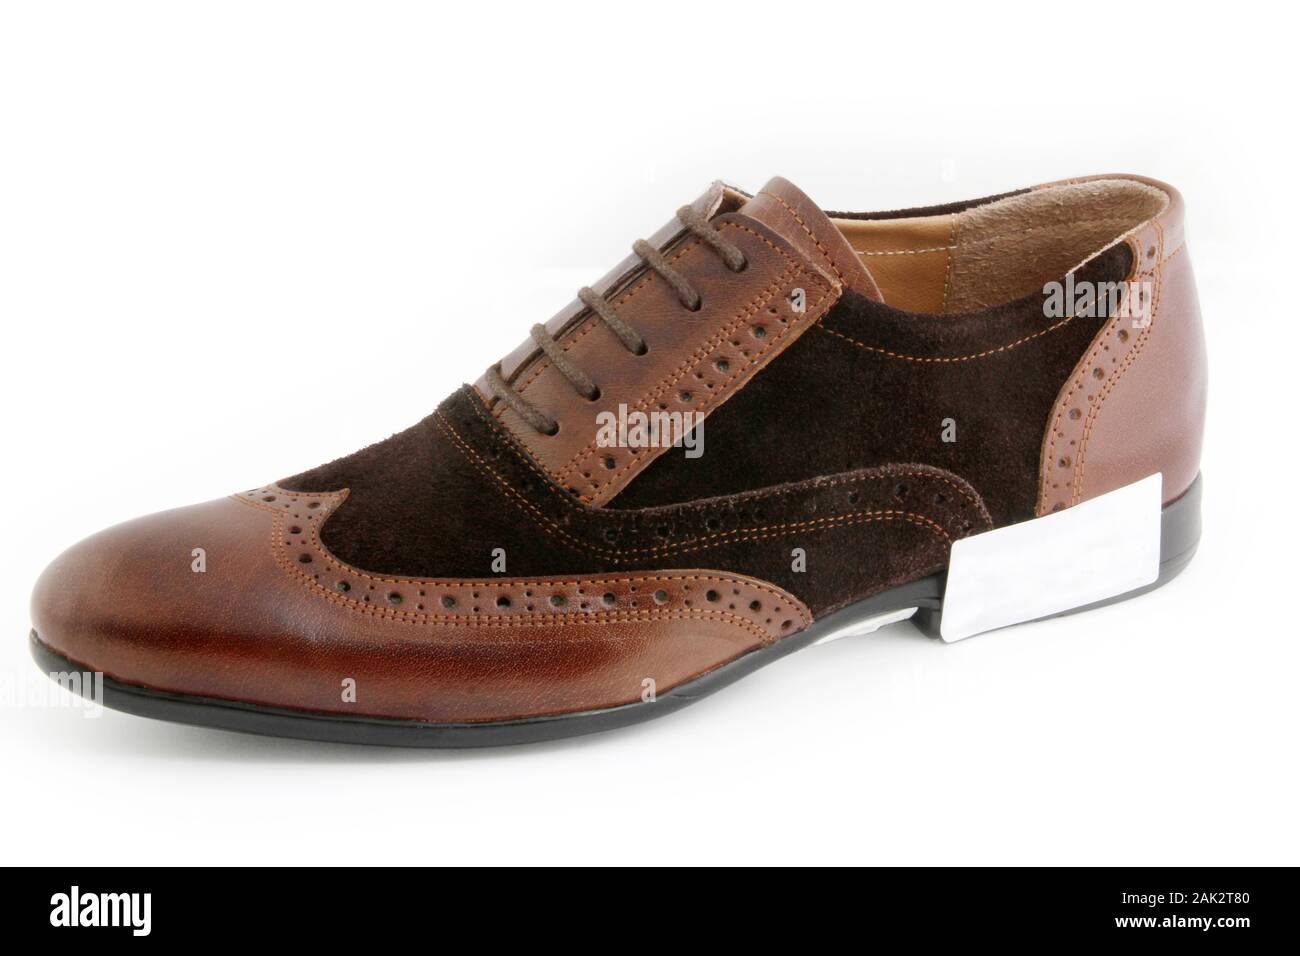 leather men's shoes Stock Photo